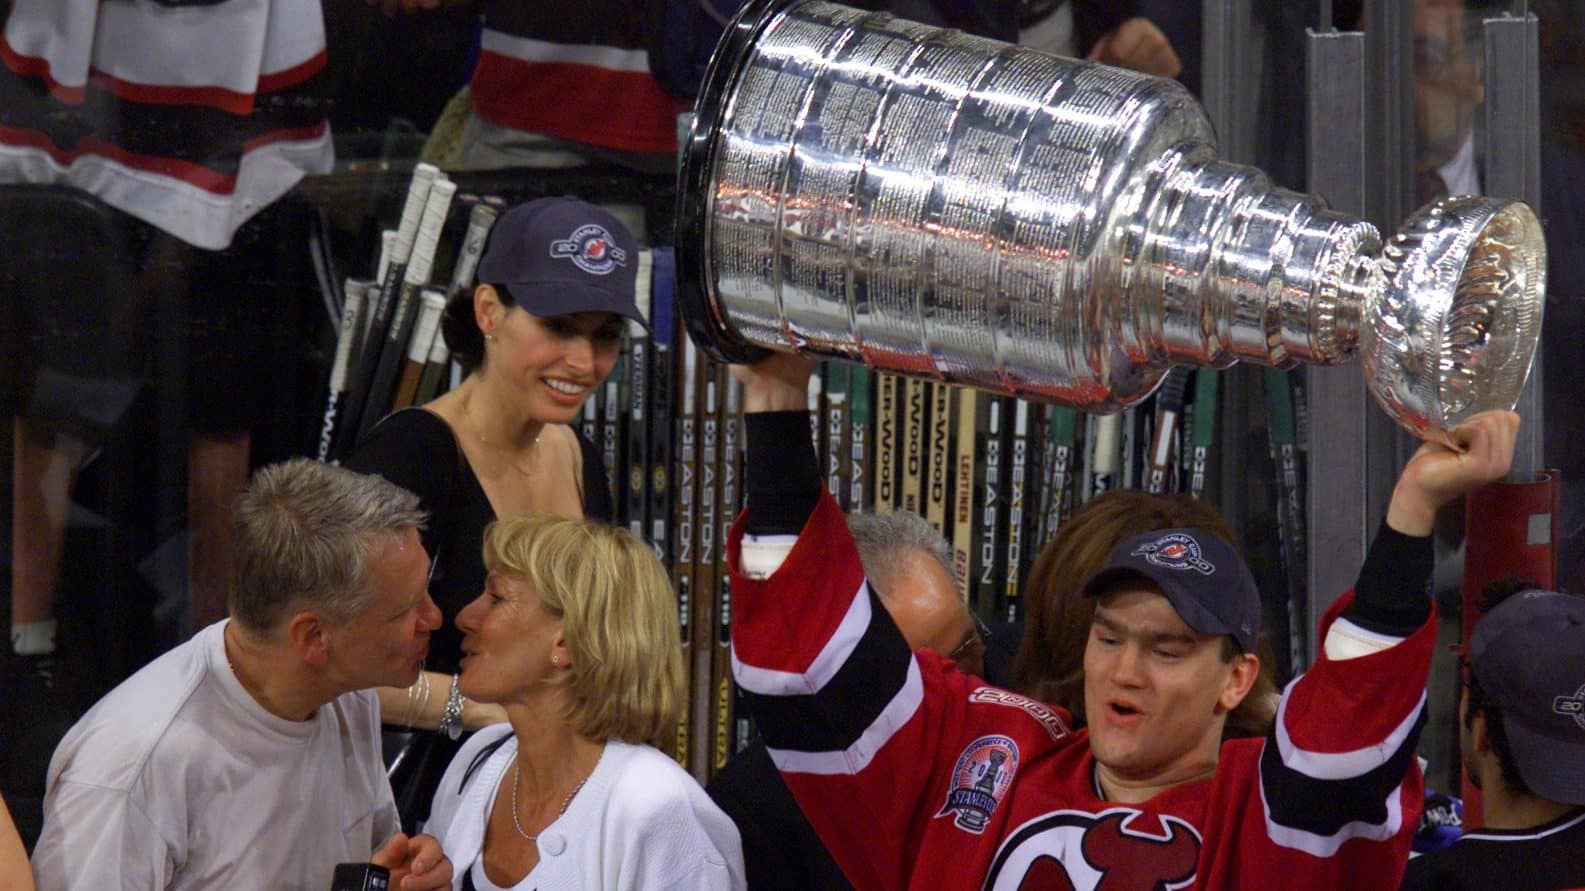 10 Jun 2000: Bobby Holik #16 of the New Jersey Devils hoists the Stanley Cup as his parents celebrate along with him after the New Jersey Devils won Game Six of the 2000 NHL Stanley Cup Finals between the Dallas Stars and the New Jersey Devils at Reunion Arena in Dallas, Texas. The Devils defeated the Stars 2-1 in the second overtime period to win the Stanley Cup. DIGITAL IMAGE.